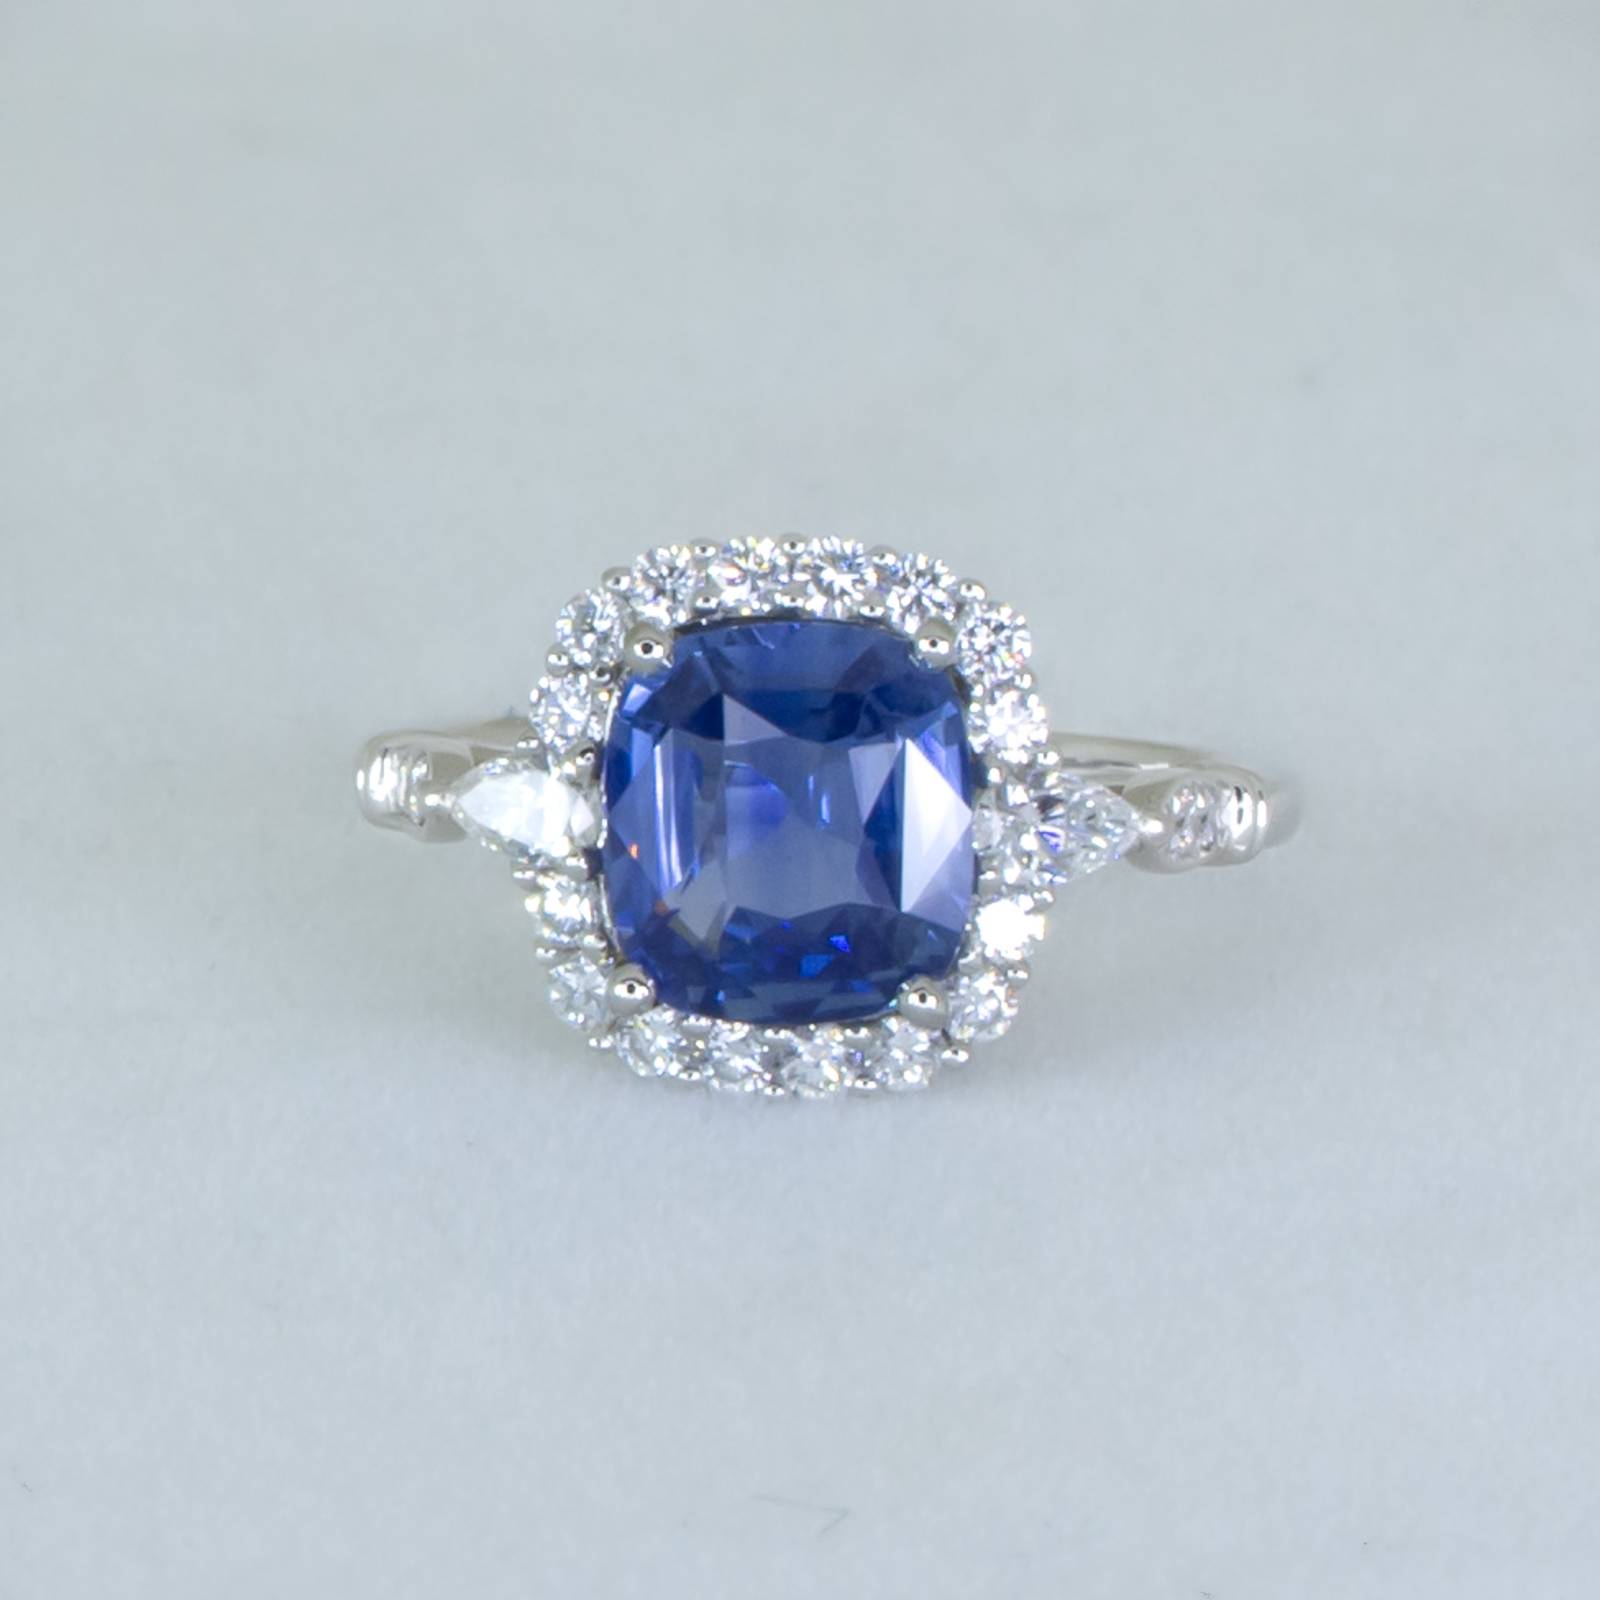 Shop Now Rubies, Sapphires and Diamond Jewelry at Gemstone Western